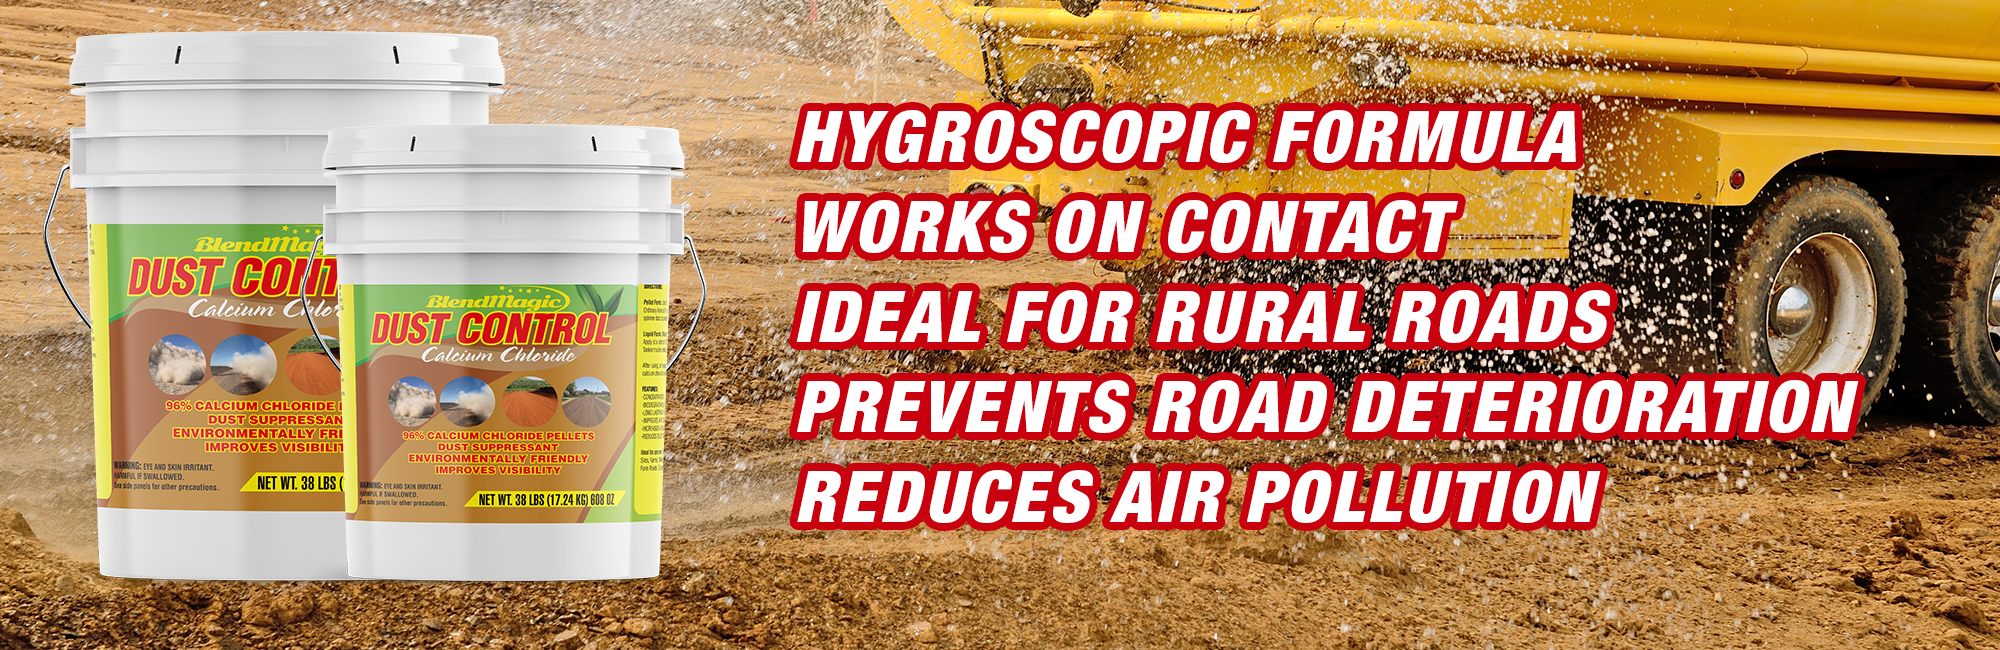 Dust Control & Stabilization for Dirt Roads, Farms and Road Construction